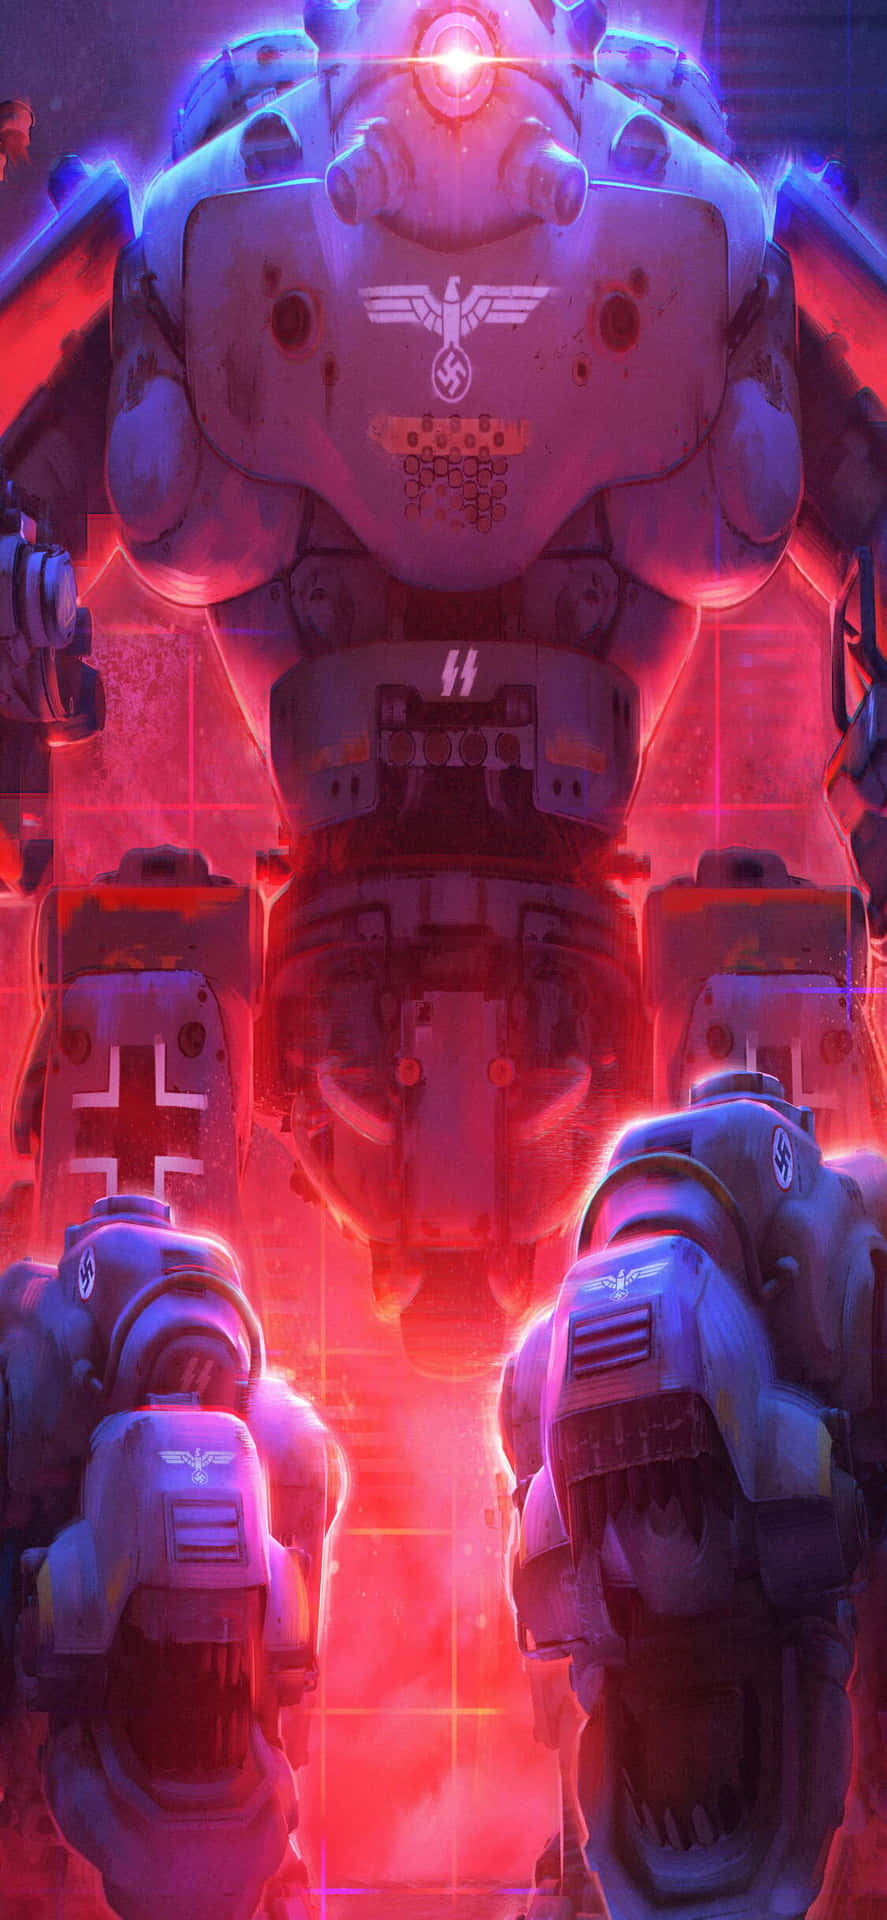 A Group Of Robots In Front Of A Red Light